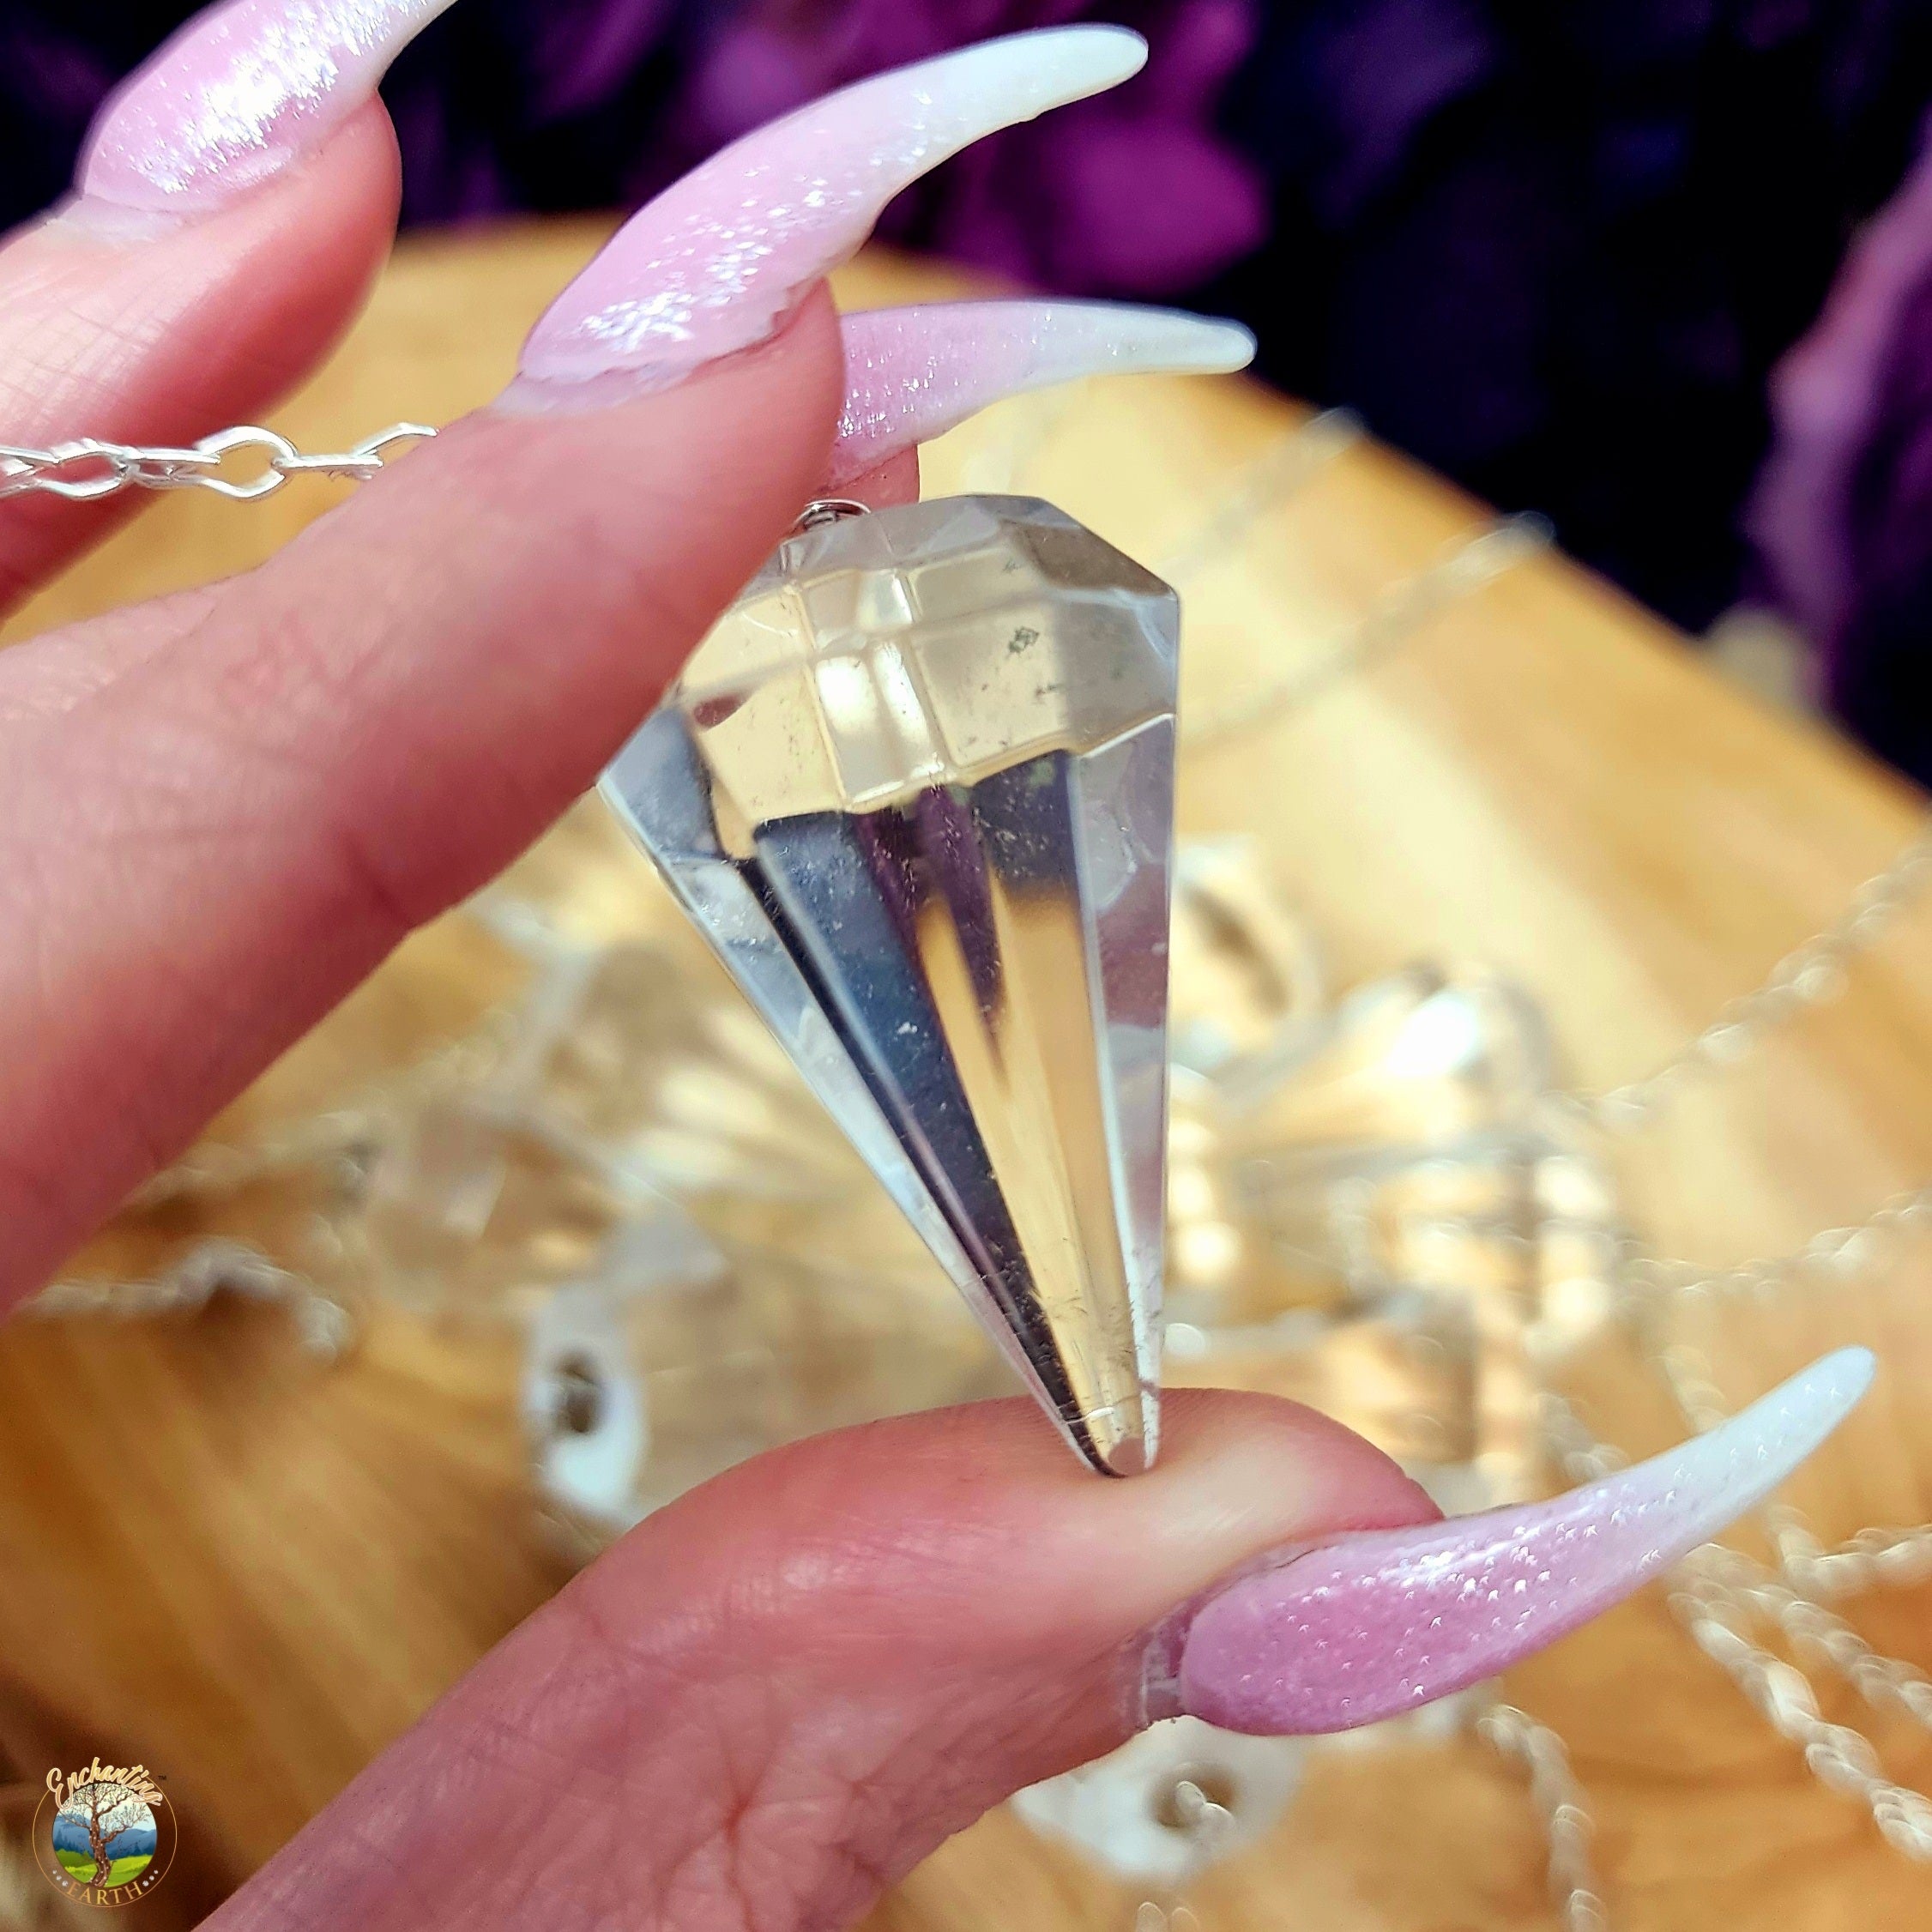 Clear Quartz Pendulum for Amplifying, Insight and Healing